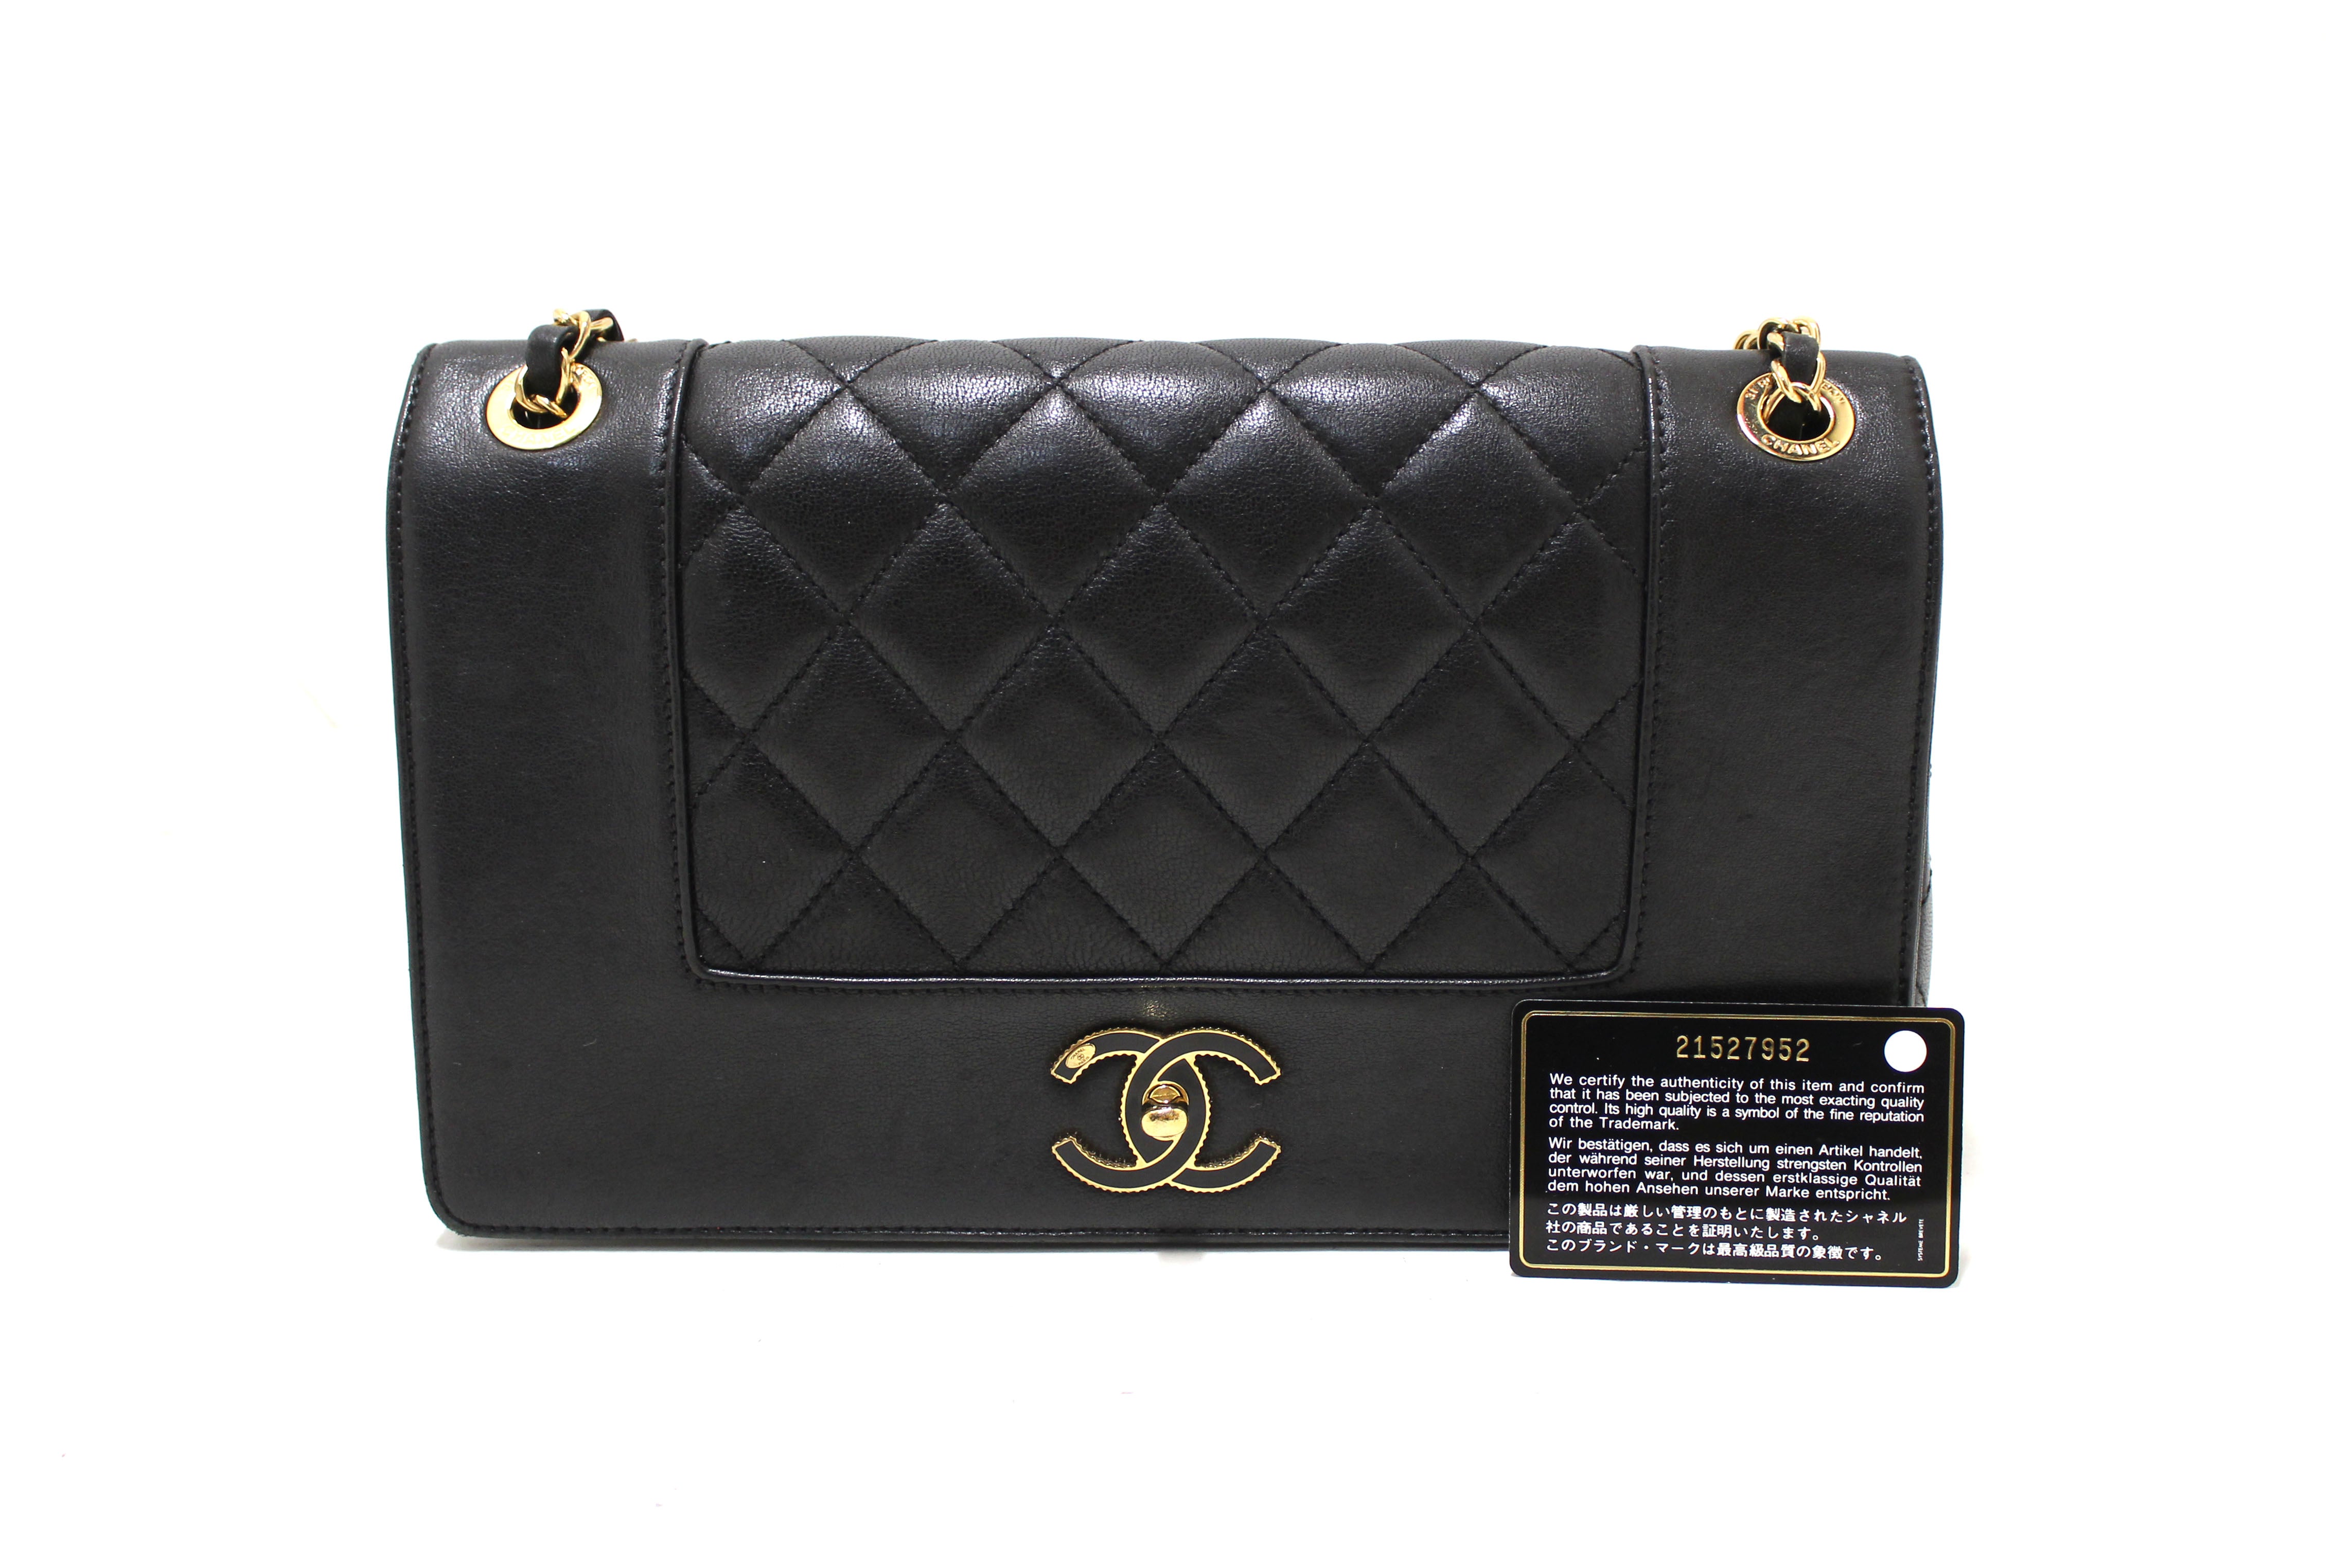 Authentic Chanel Black Quilted Goatskin Leather Large Mademoiselle Flap Bag